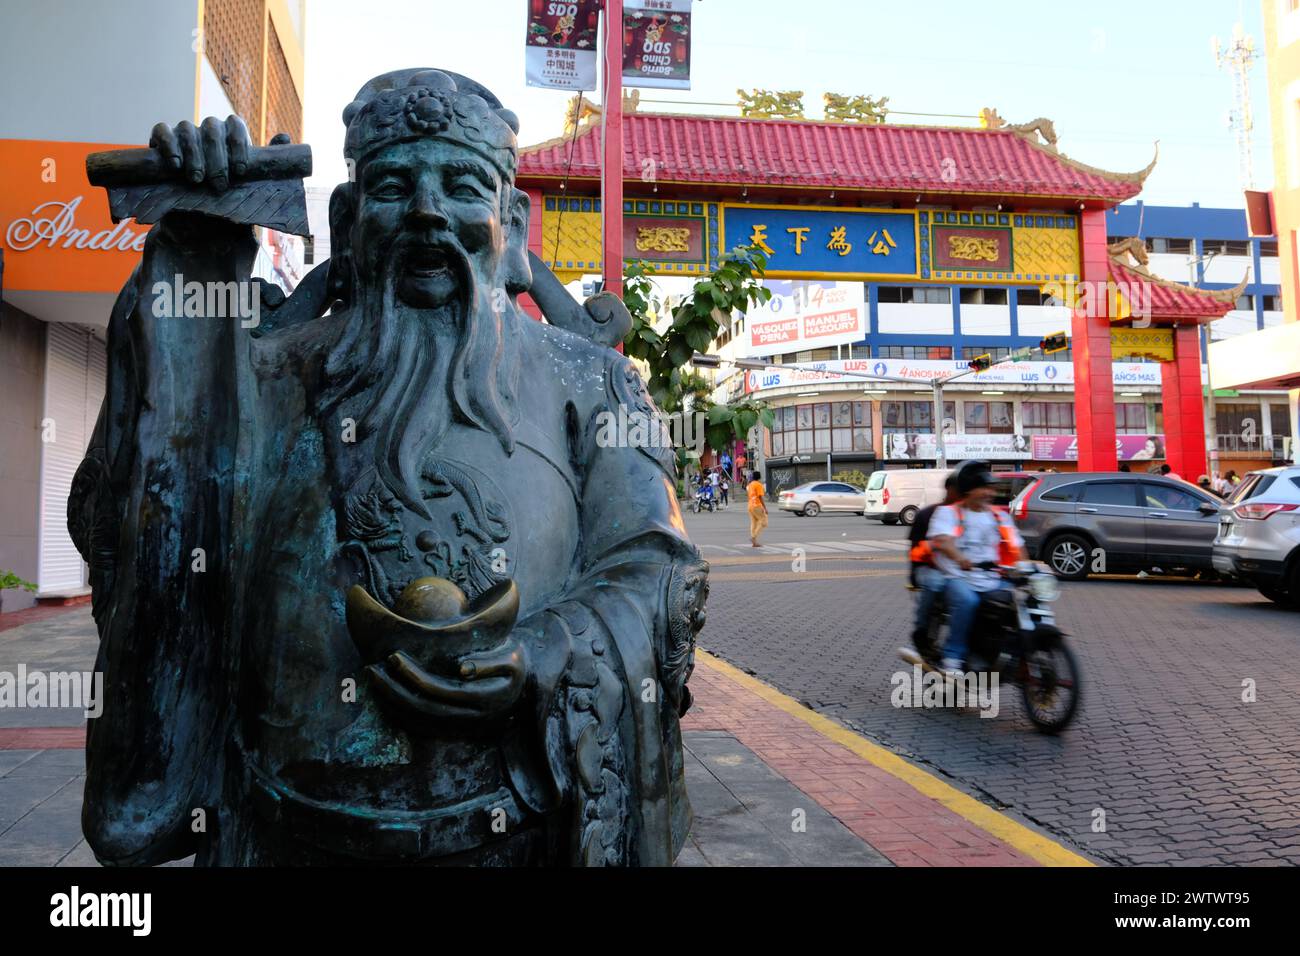 The statue of God of Wealth with a Chinese arched gate in the background in Santo Domingo Chinatown.Santo Domingo.Dominican Republic Stock Photo